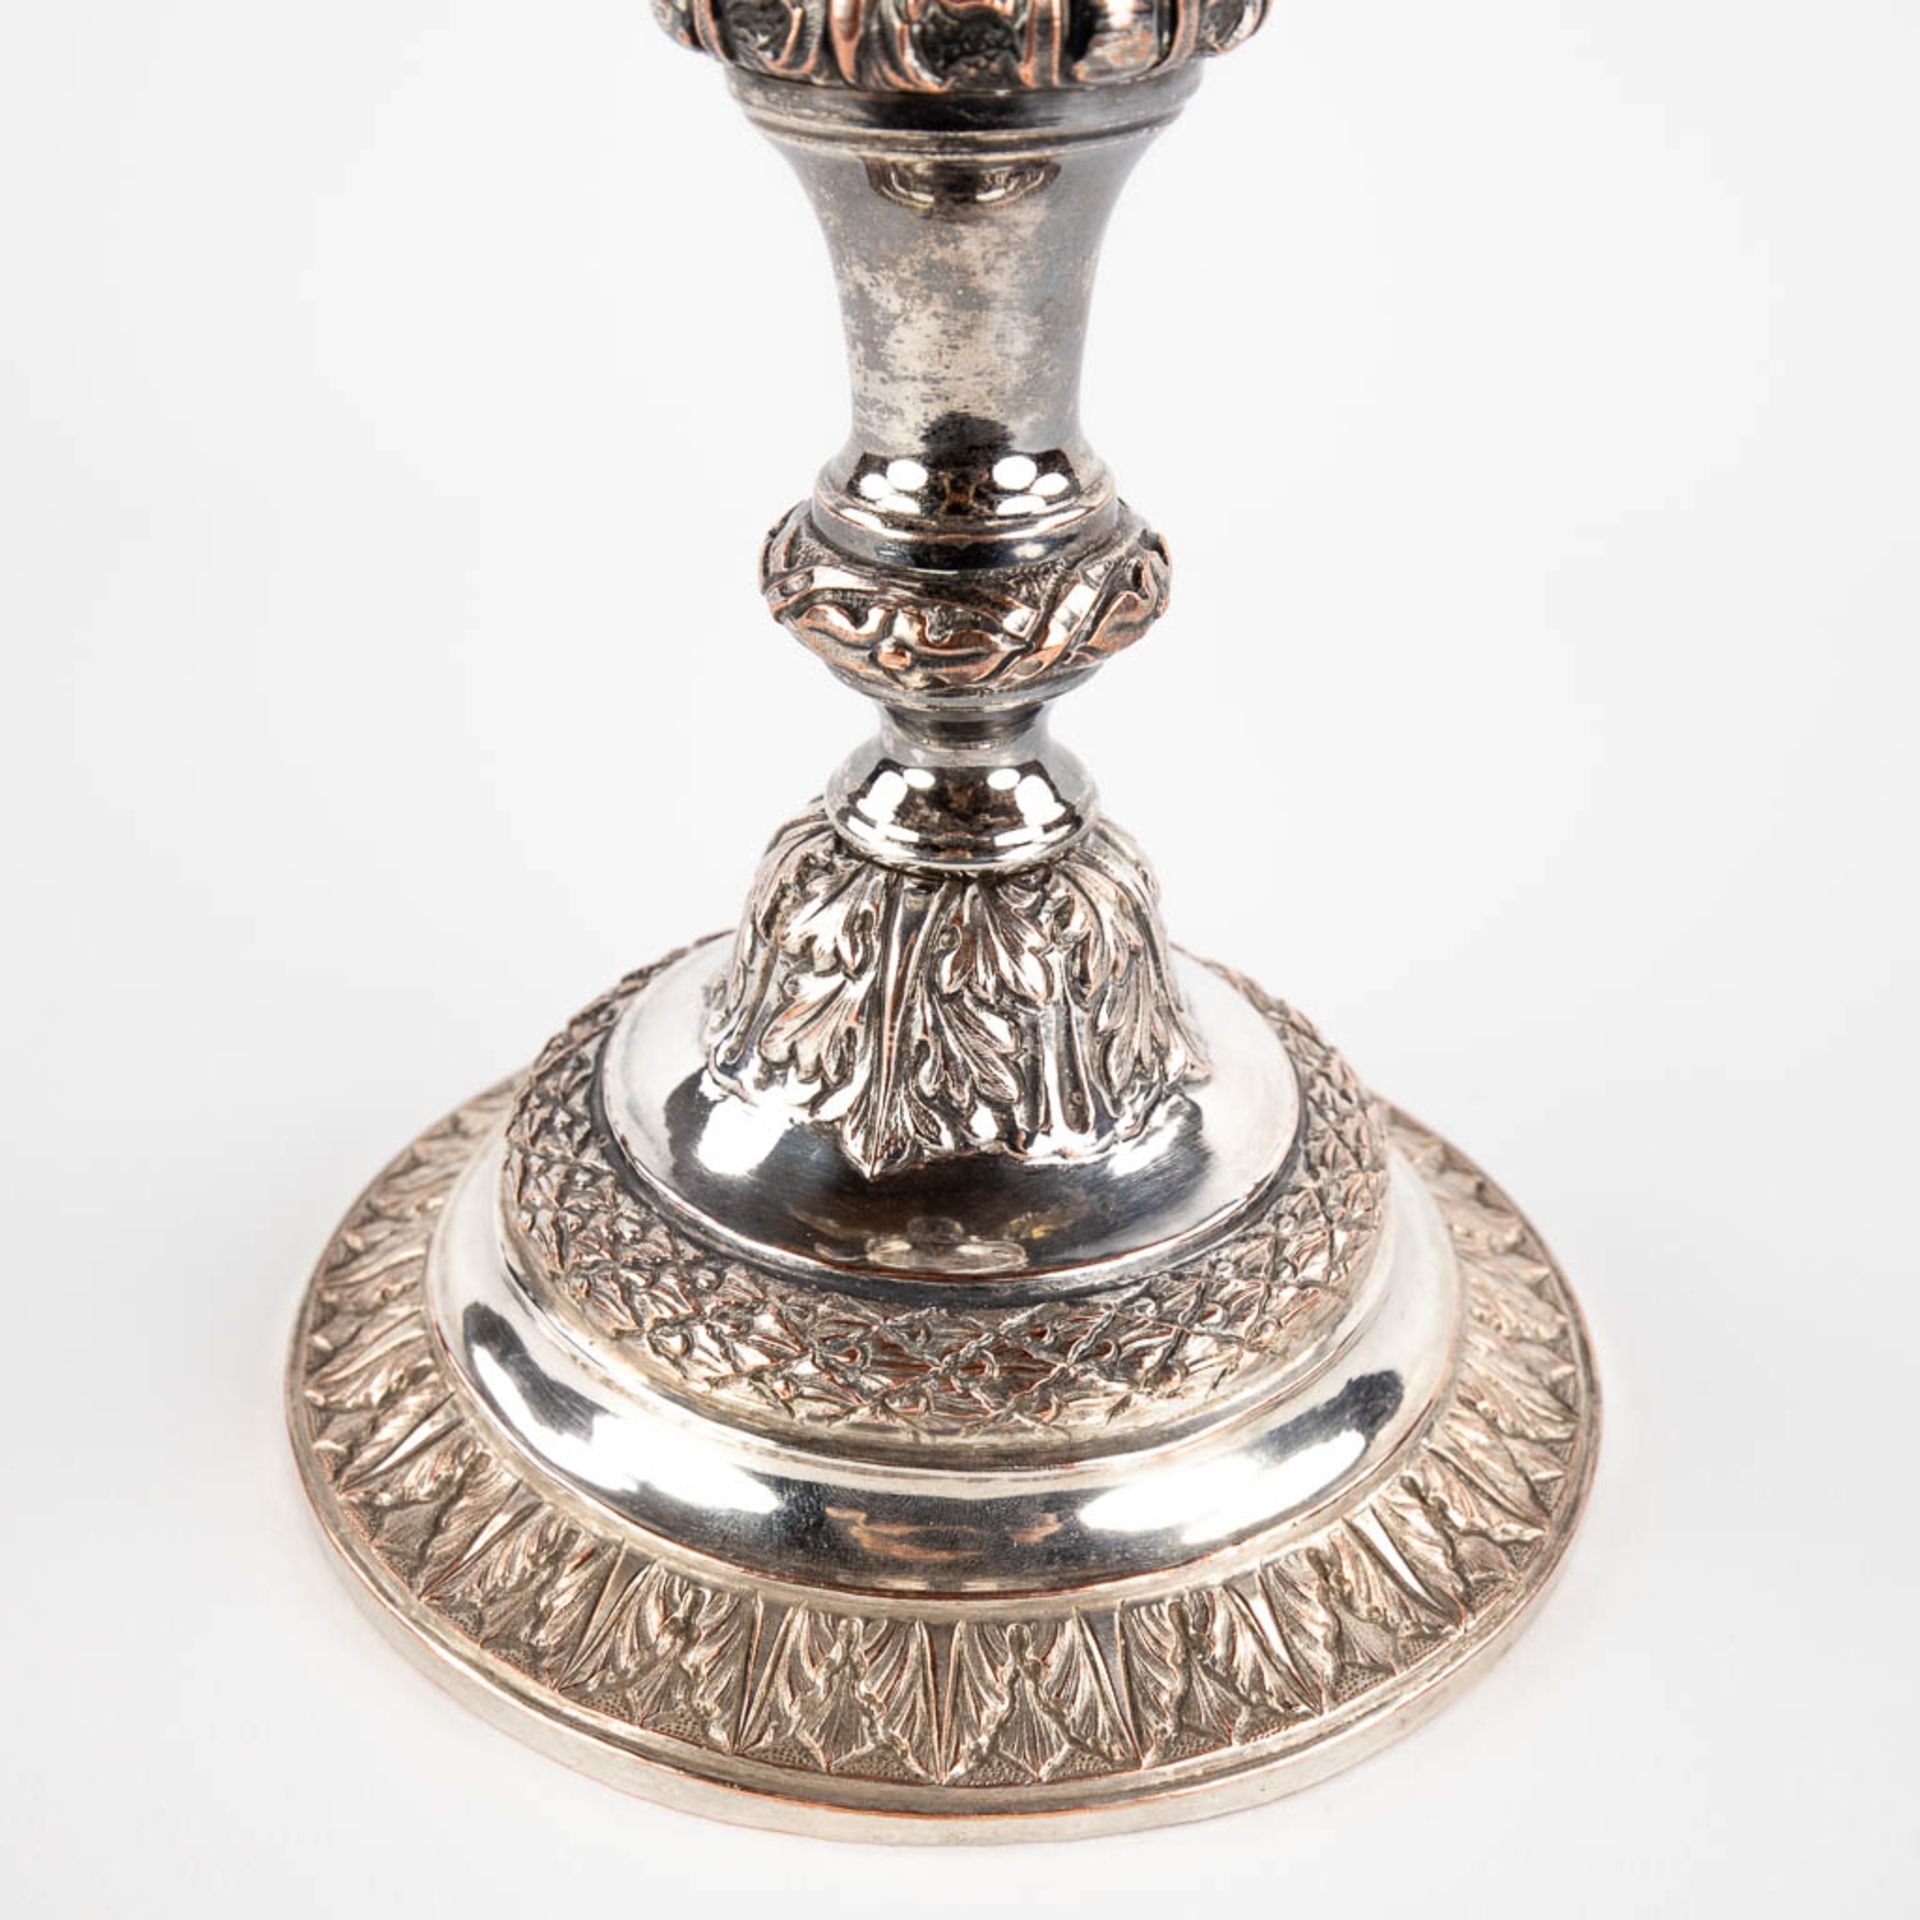 A sunburst monstrance, silver-plated metal and brass. Circa 1900. (D:15 x W:29 x H:57 cm) - Image 13 of 14